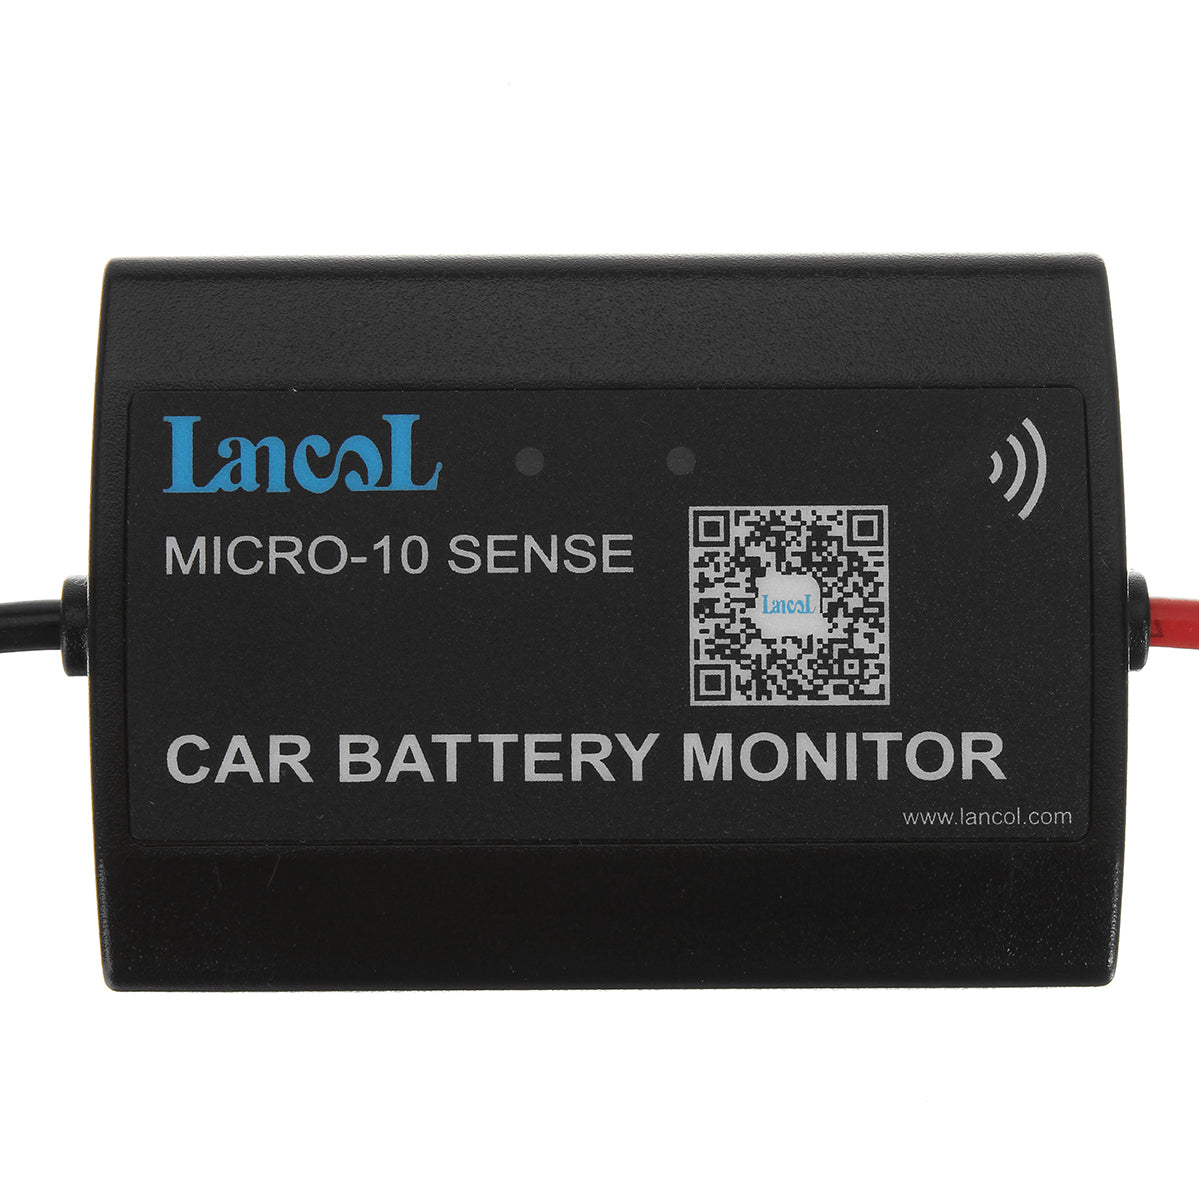 12V Car Battery Monitor bluetooth 4.0 Voltage Meter Cranking Charging Test For iPhone And Android - Auto GoShop